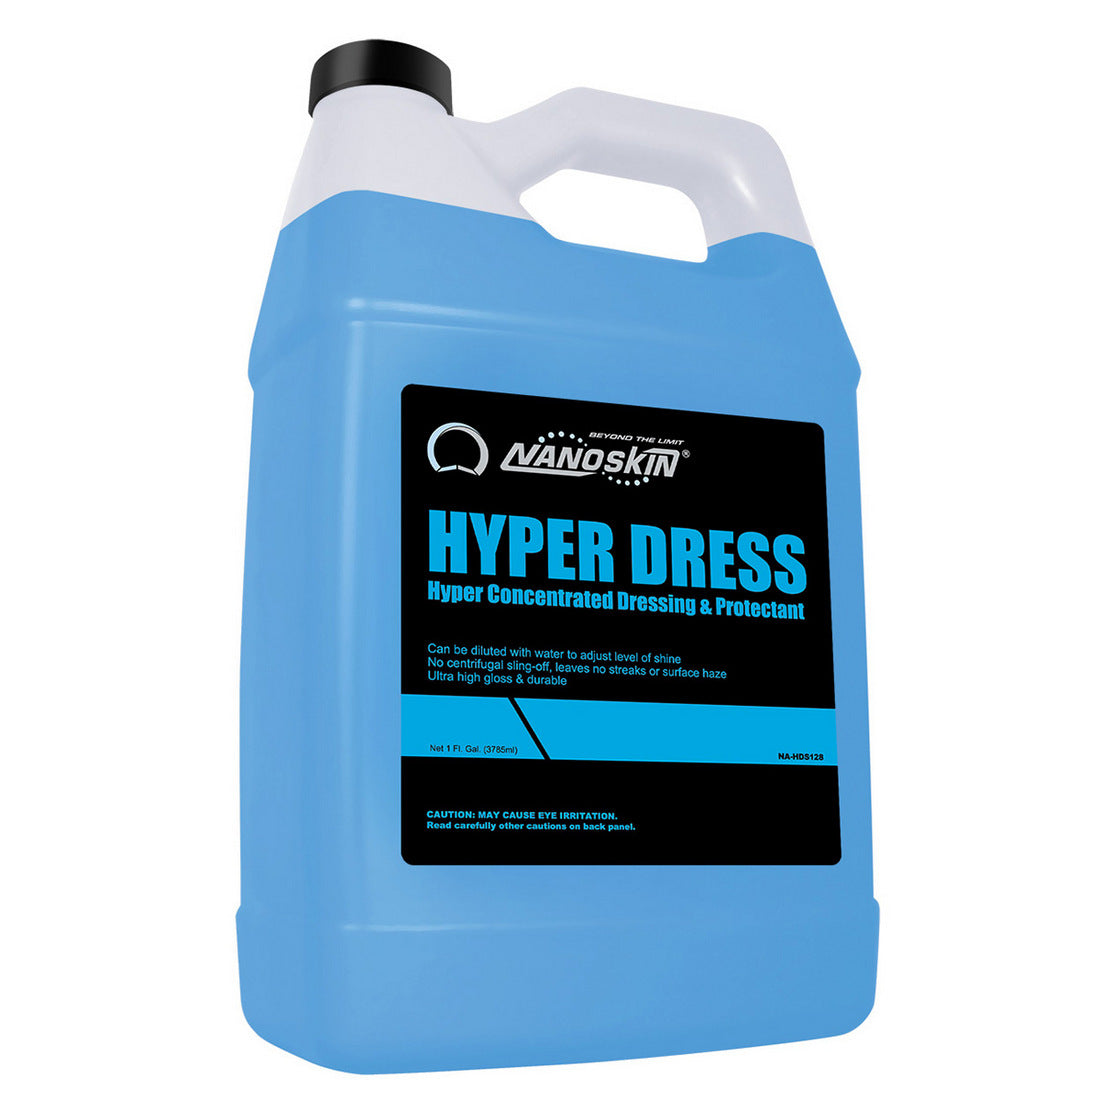 HYPER DRESS Hyper Concentrated Dressing & Protectant 1:1 ~ 4:1